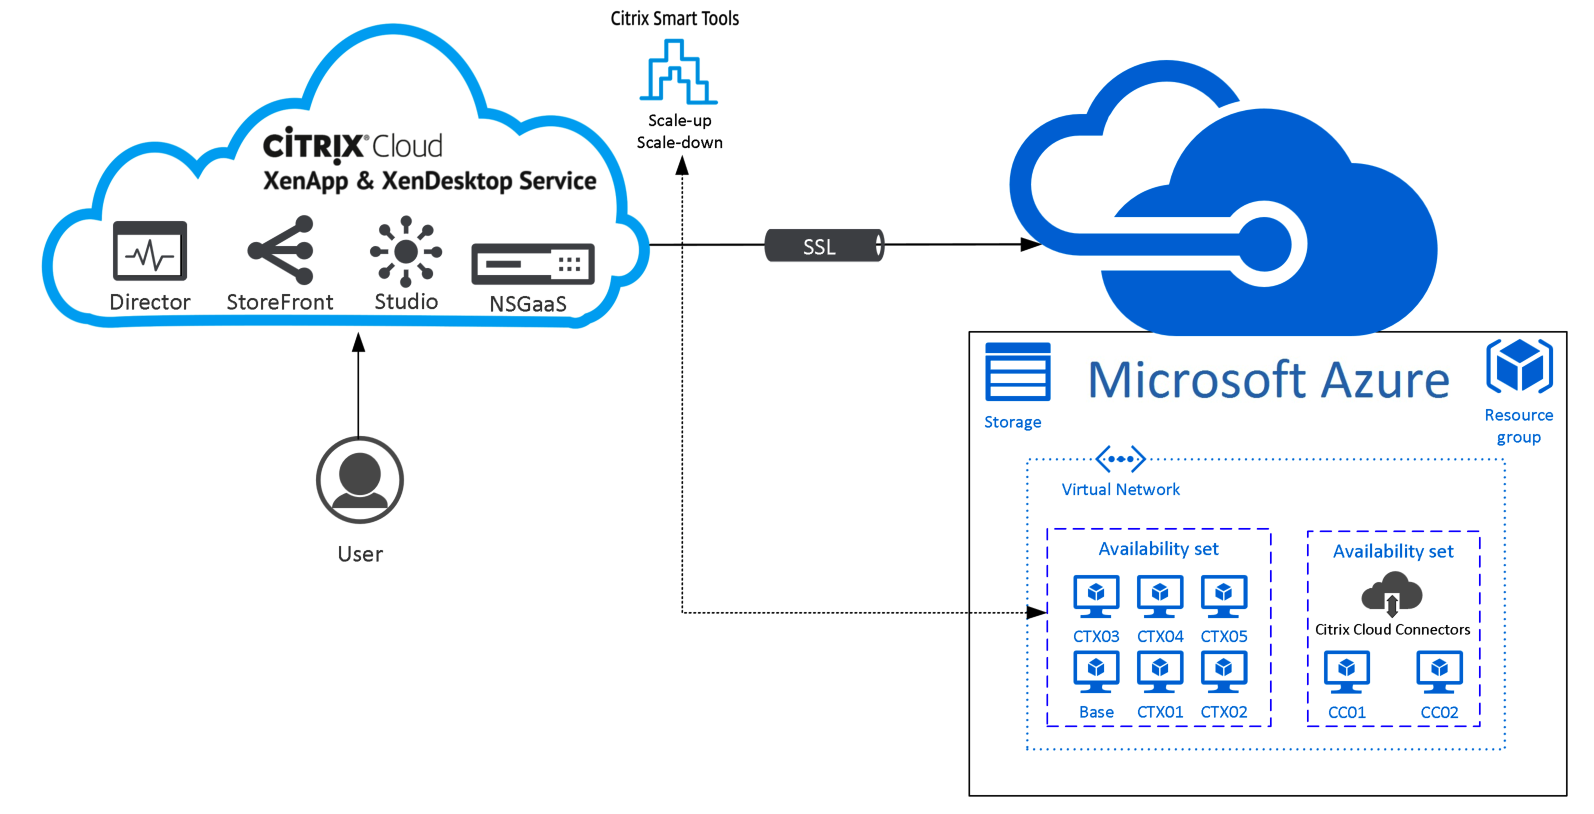 Configure Citrix Cloud Virtual Apps And Desktops Xenapp And Xendesktop Service Using Managed Disks And Citrix Optimizer In Azure Christiaanbrinkhoff Com Sharing Cloud And Virtualization Knowledge